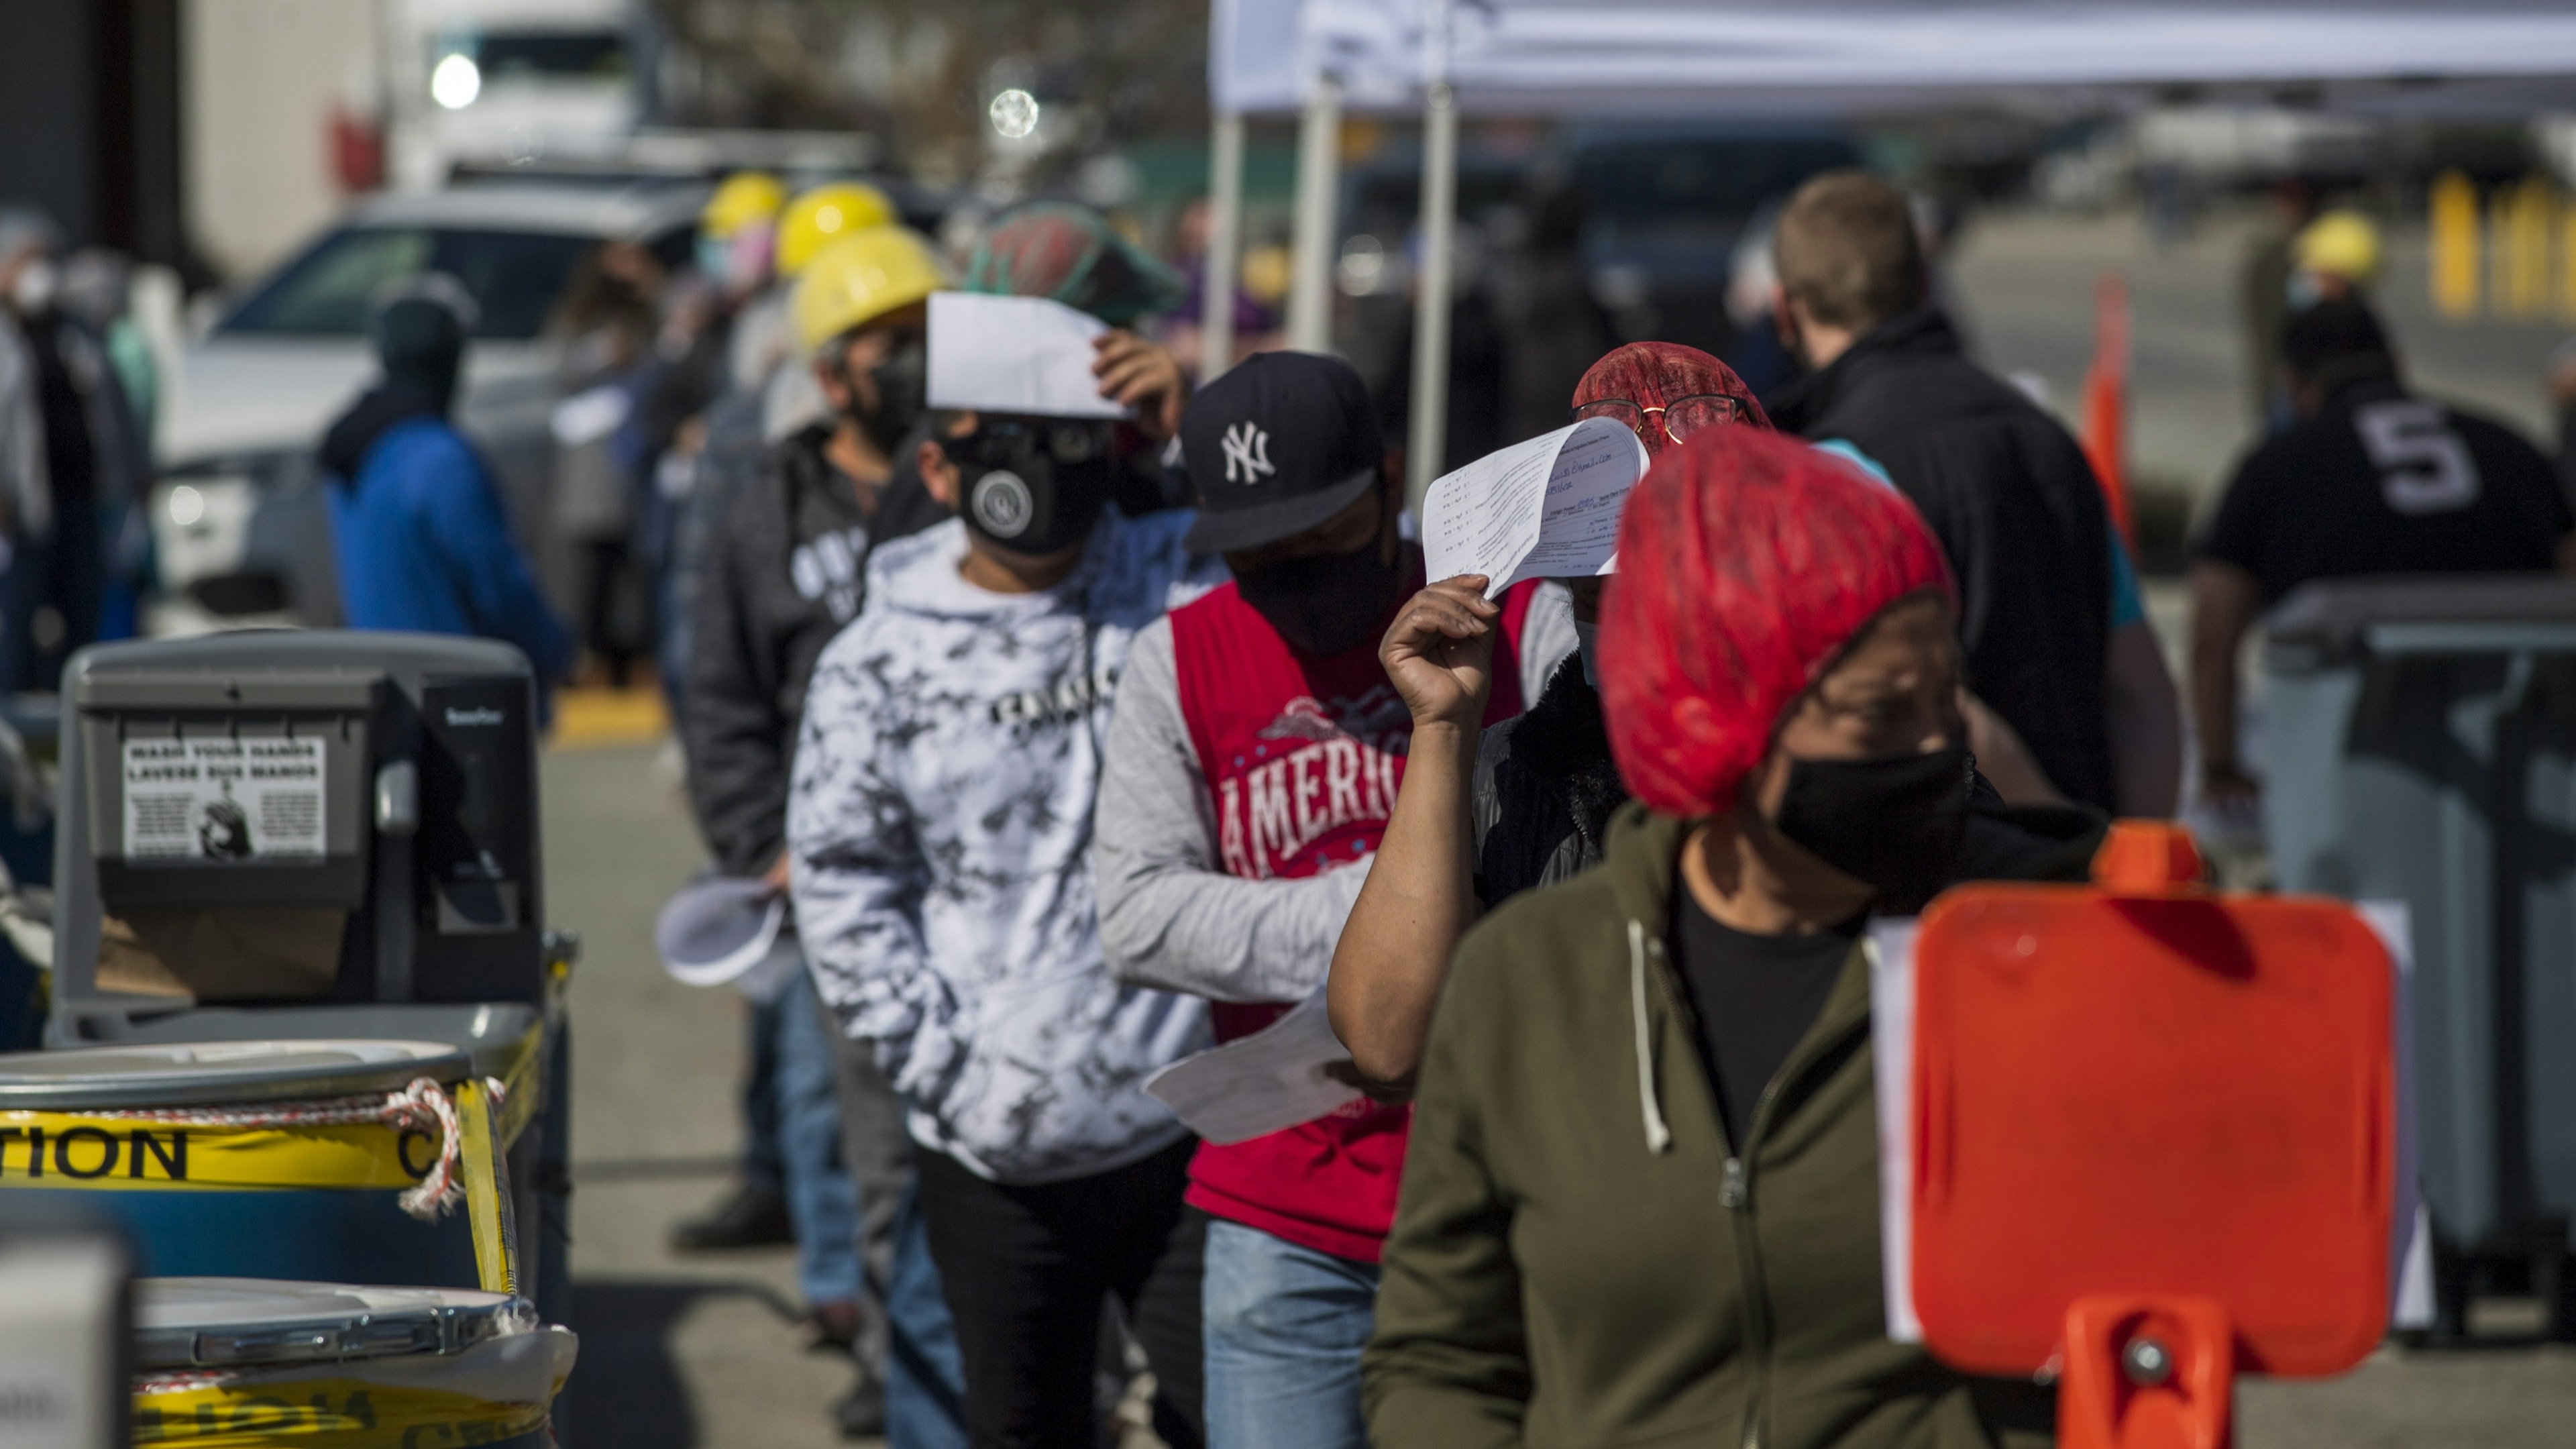 Farmworkers wait in line to receive the Moderna Covid-19 vaccine at a vaccination clinic organized by the Santa Clara County Public Health Department at Christopher Ranch in Gilroy, California, U.S., on Thursday, March 4, 2021.